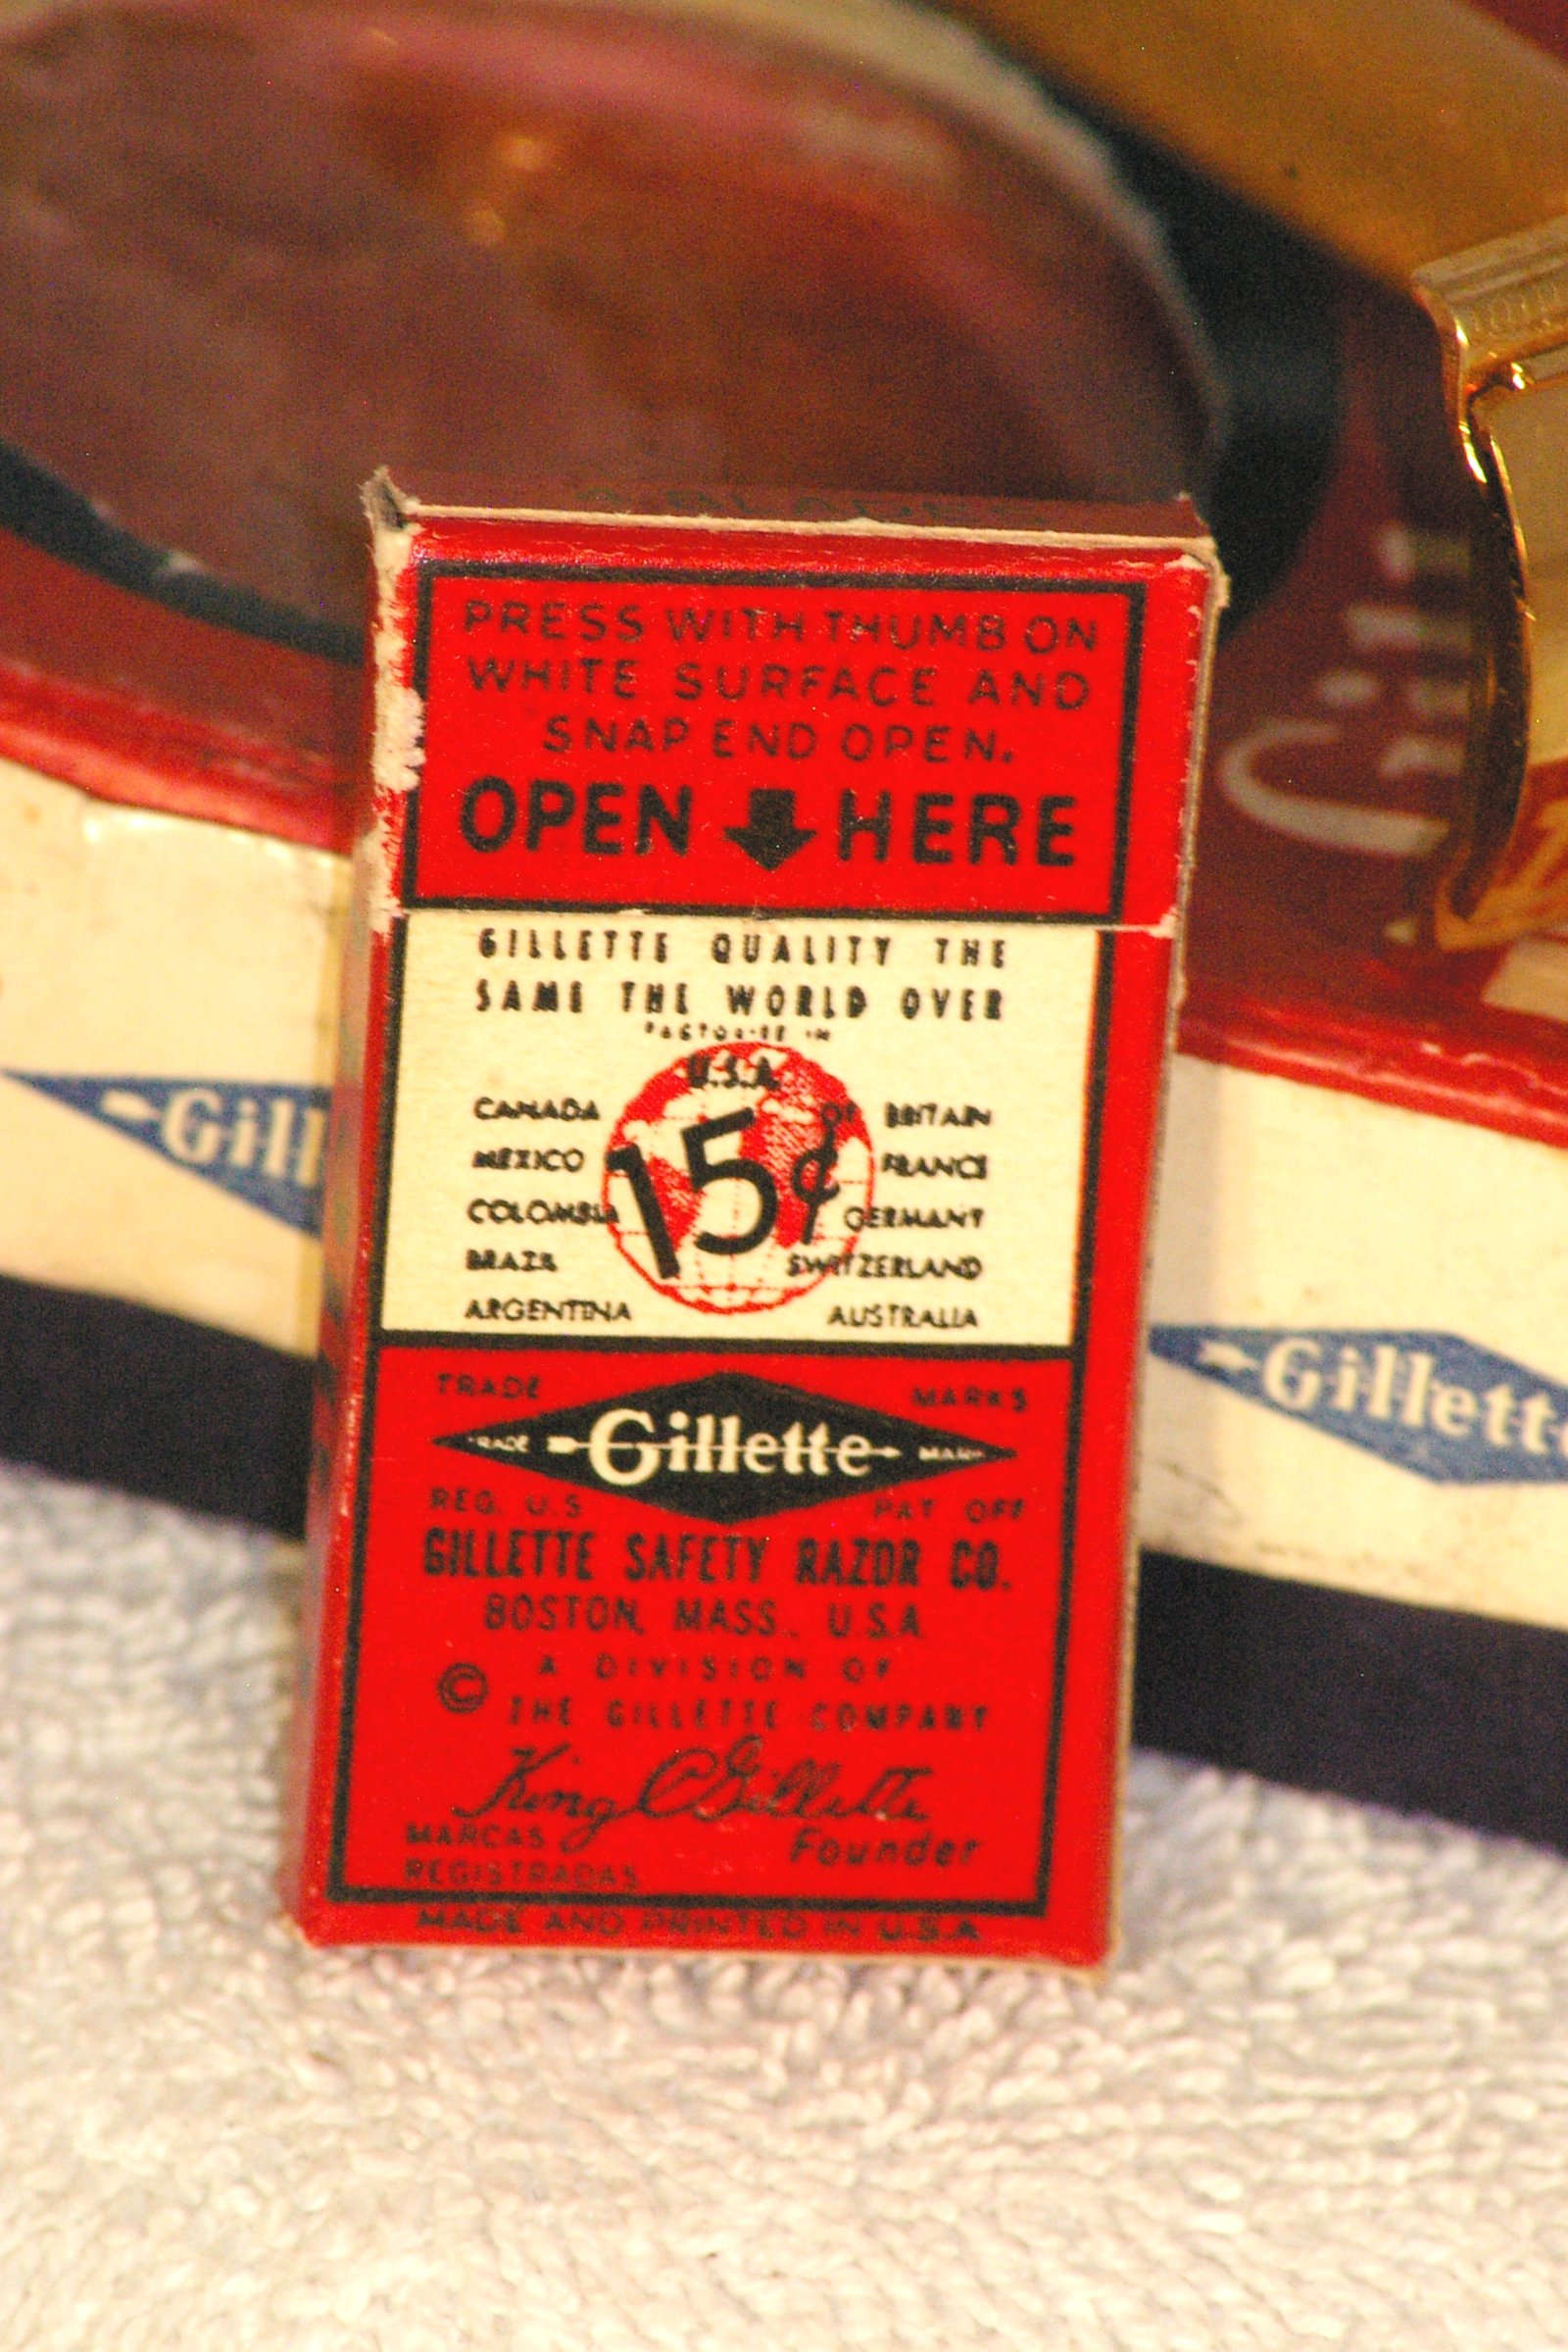 Gillette Tech Safety Razor in Box from 1941